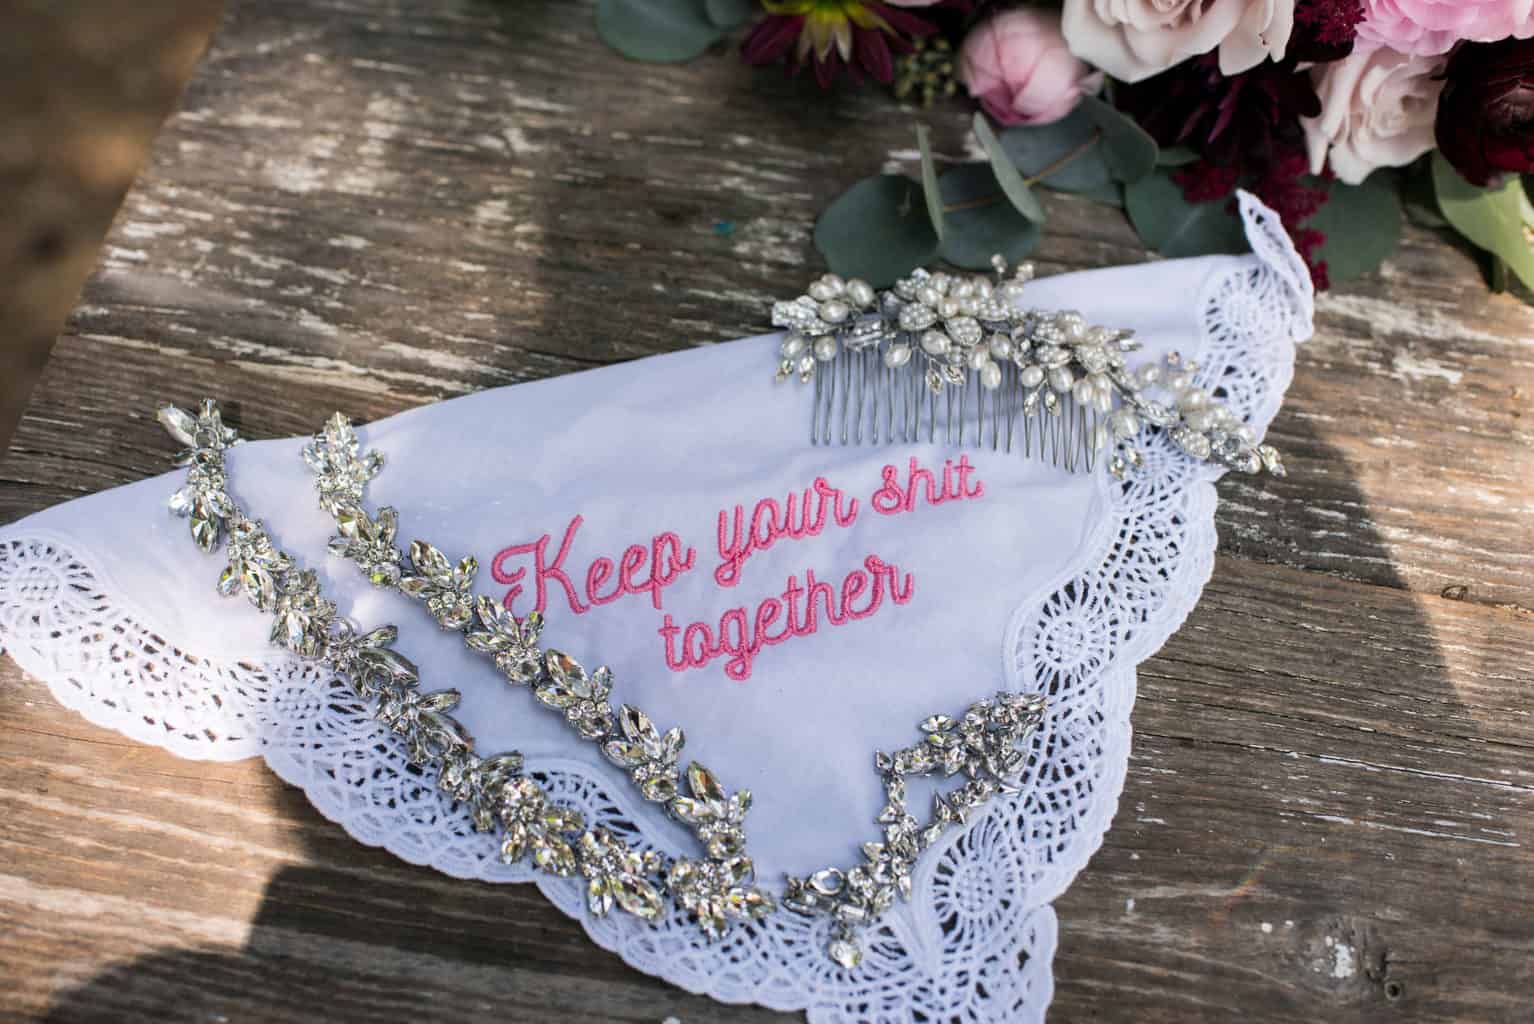 How to Keep your Sh*t Together on your Wedding Day